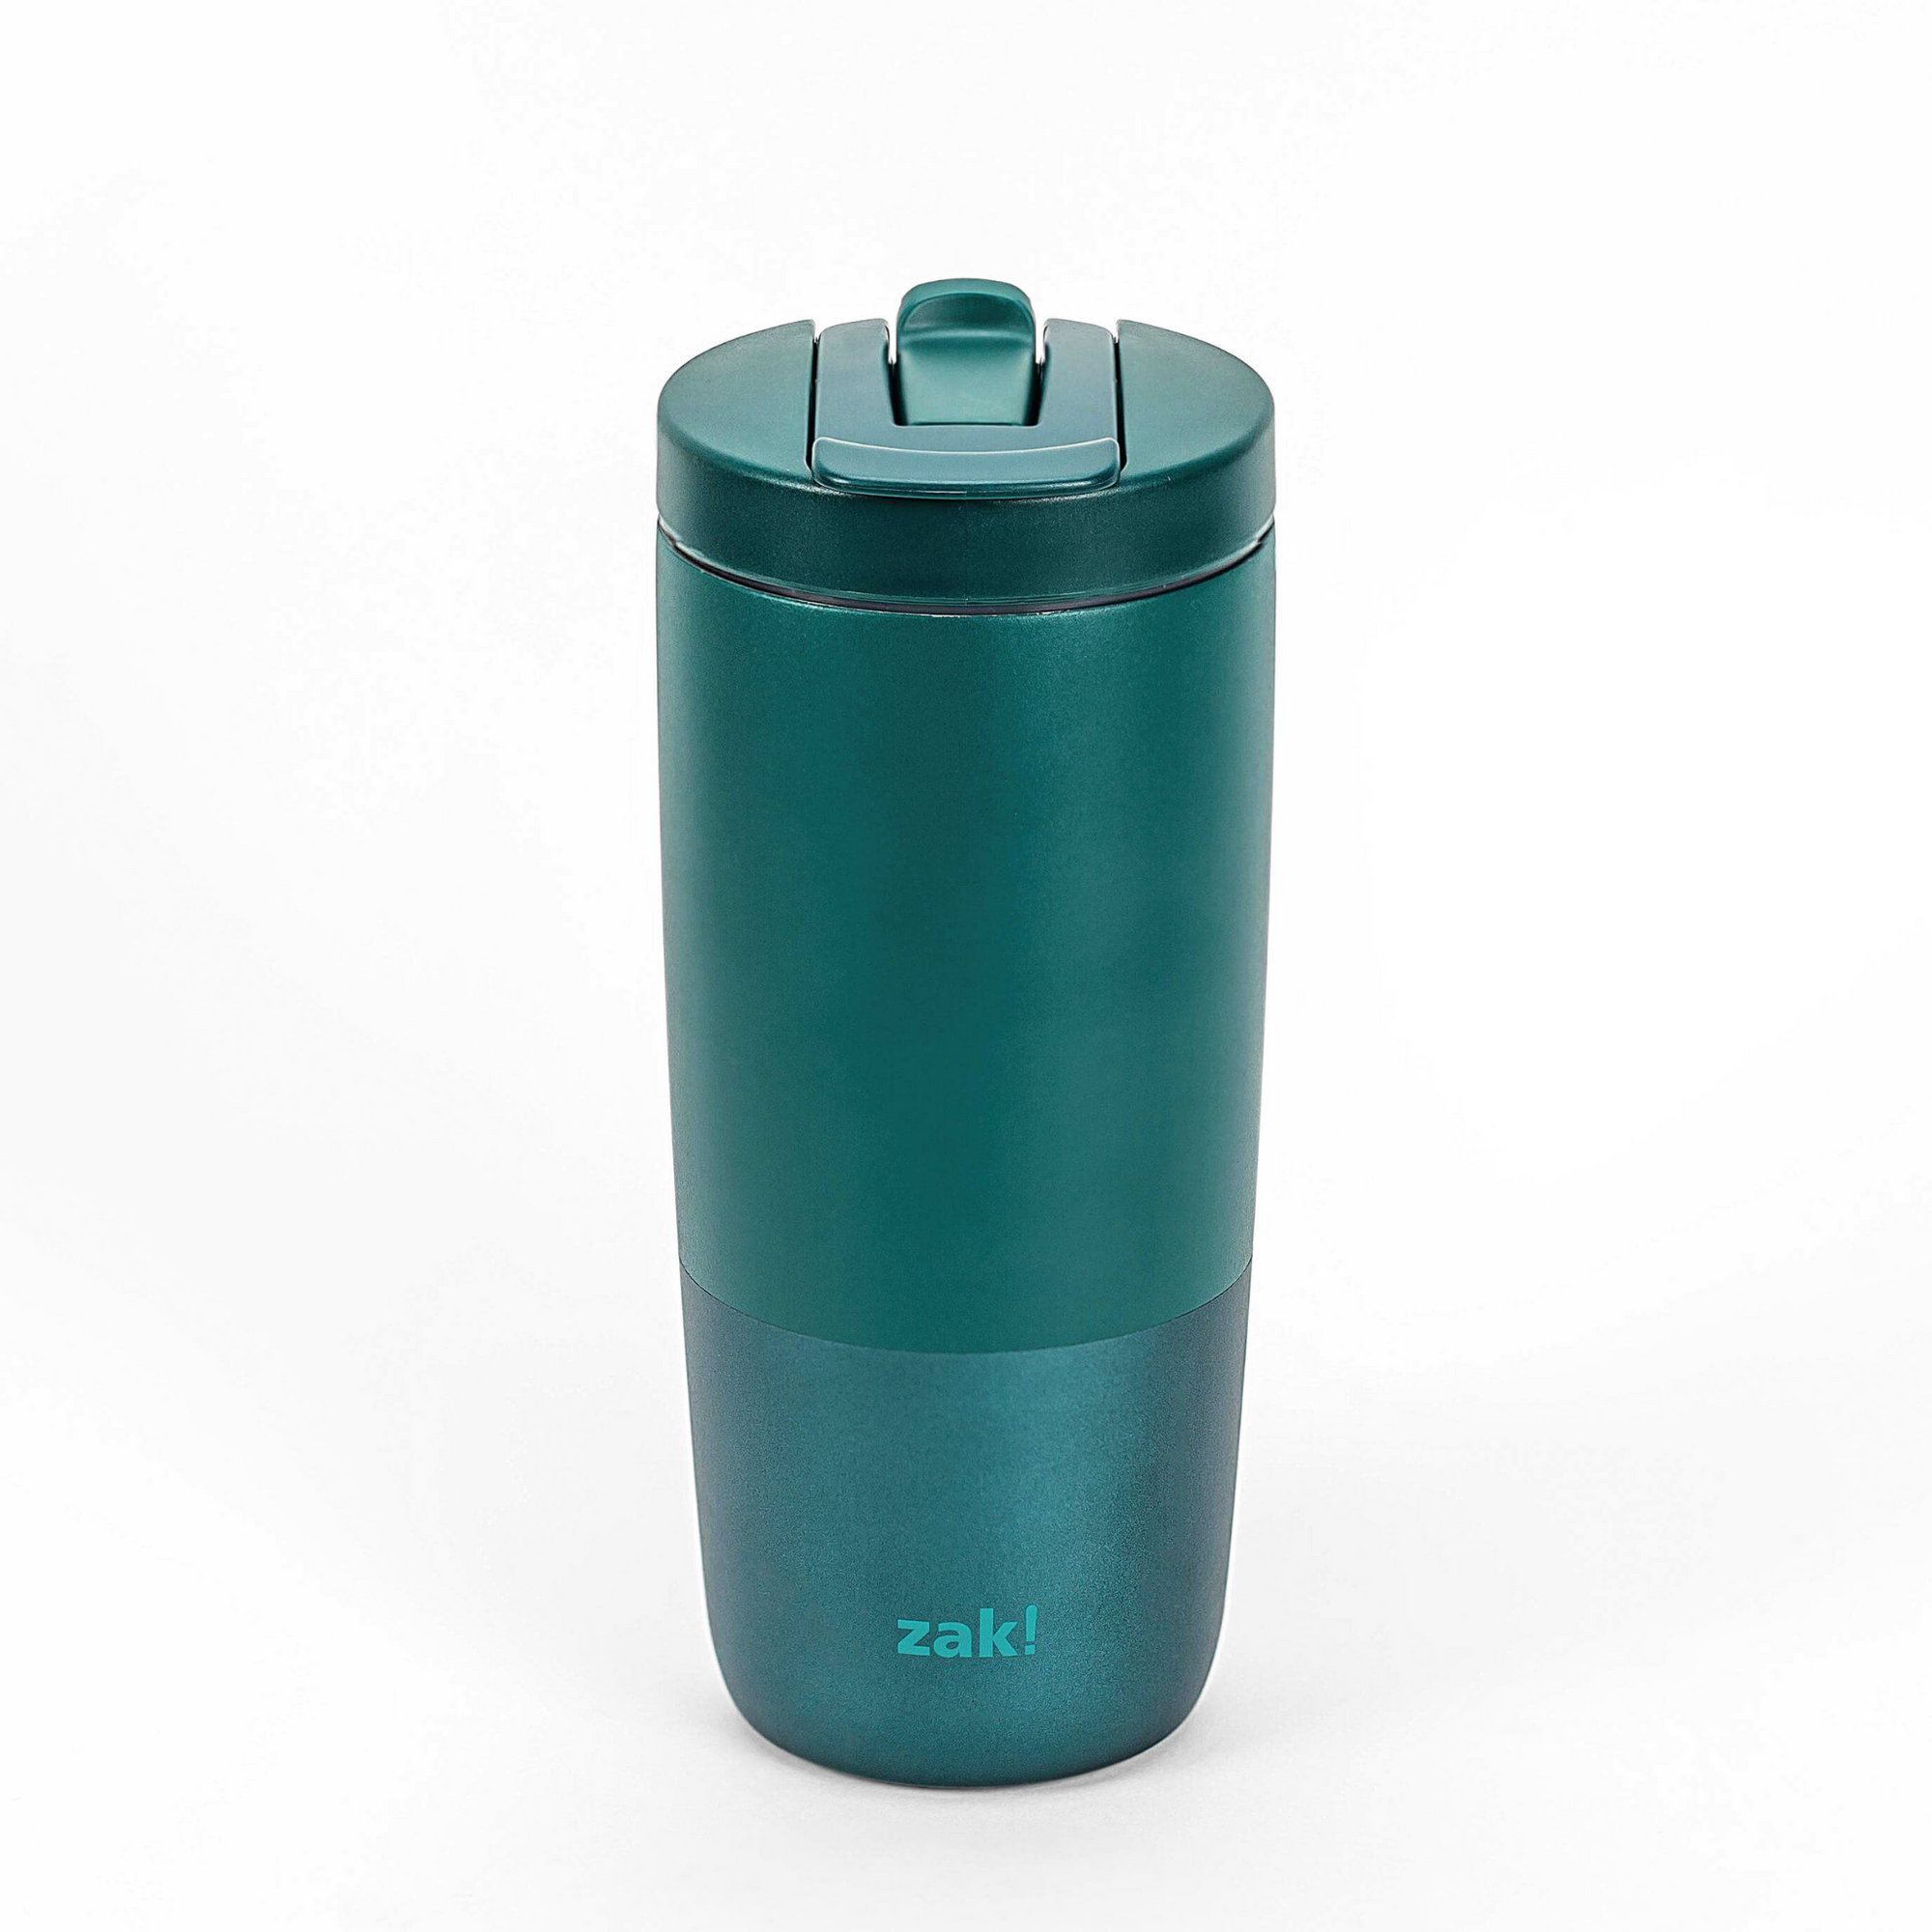 Sutton Insulated Stainless Steel Tumbler with 2-in-1 Straw and Sip Lid - Jade, 20 Ounces